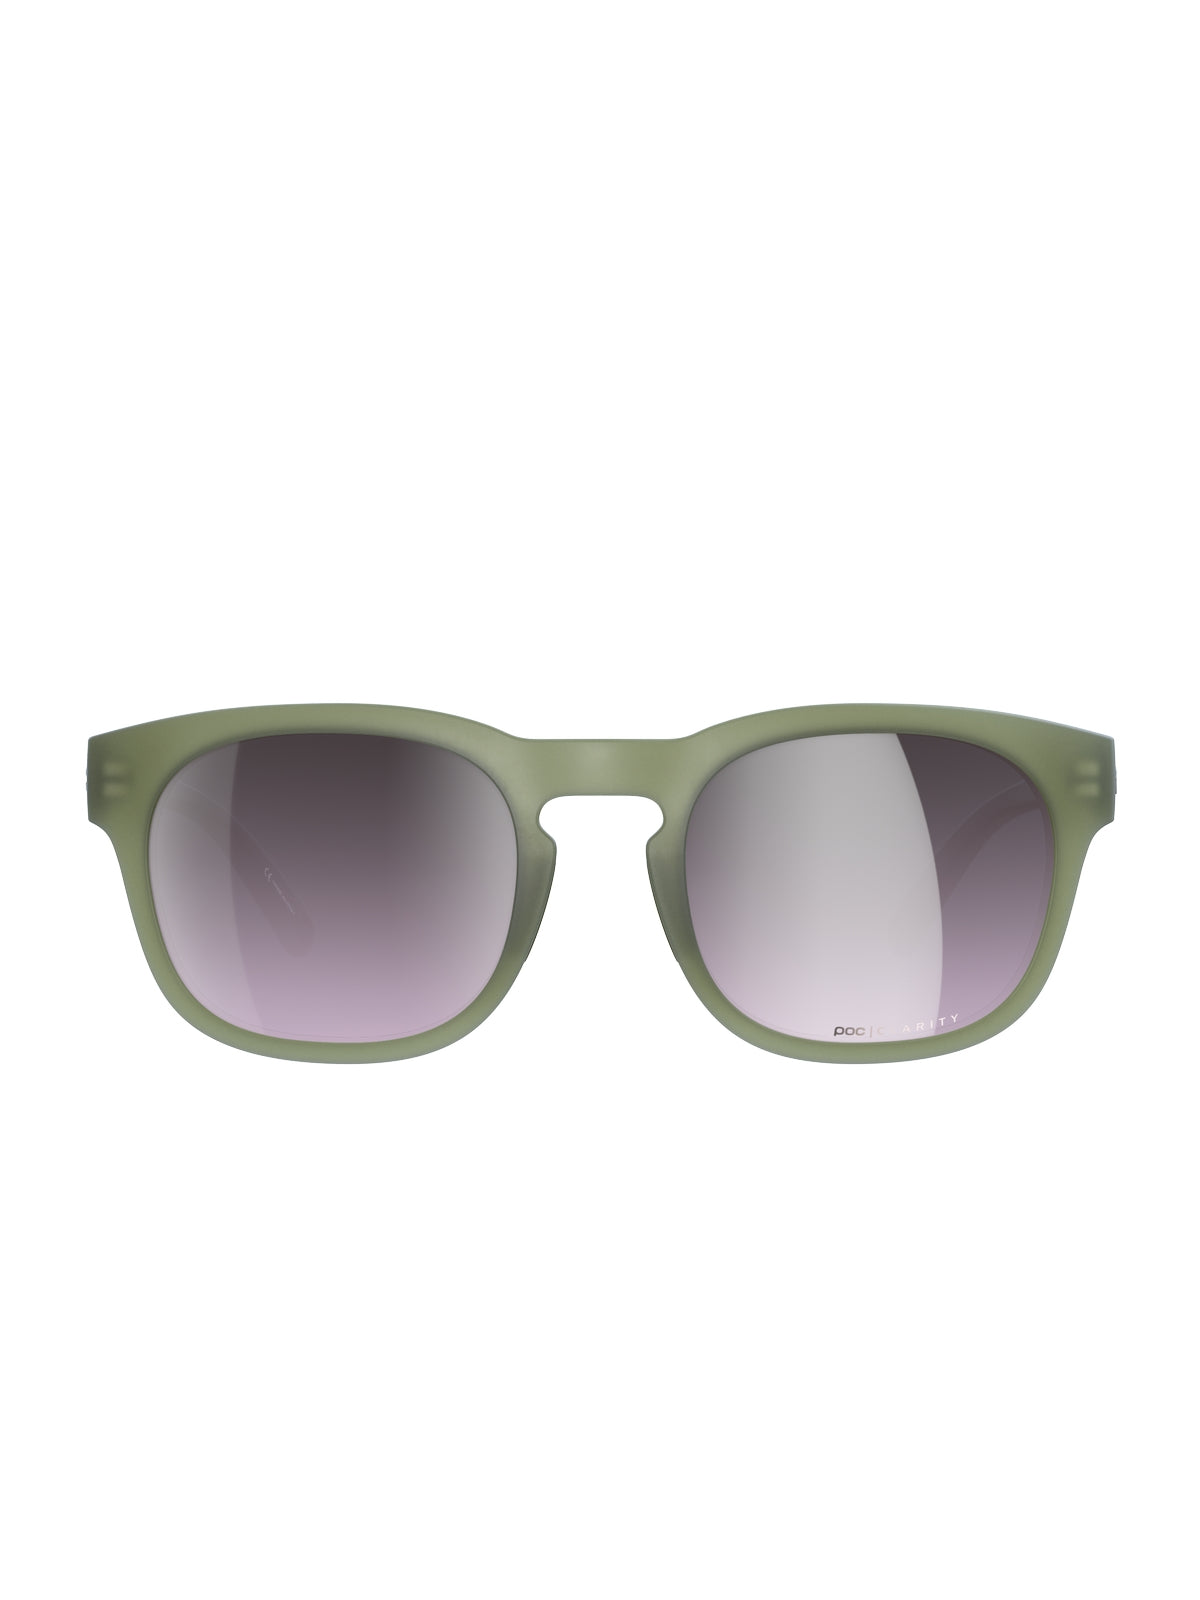 Okulary POC REQUIRE - Epid. Green Translucent - Clarity ROAD | Violet/Silver Mirror Cat 3